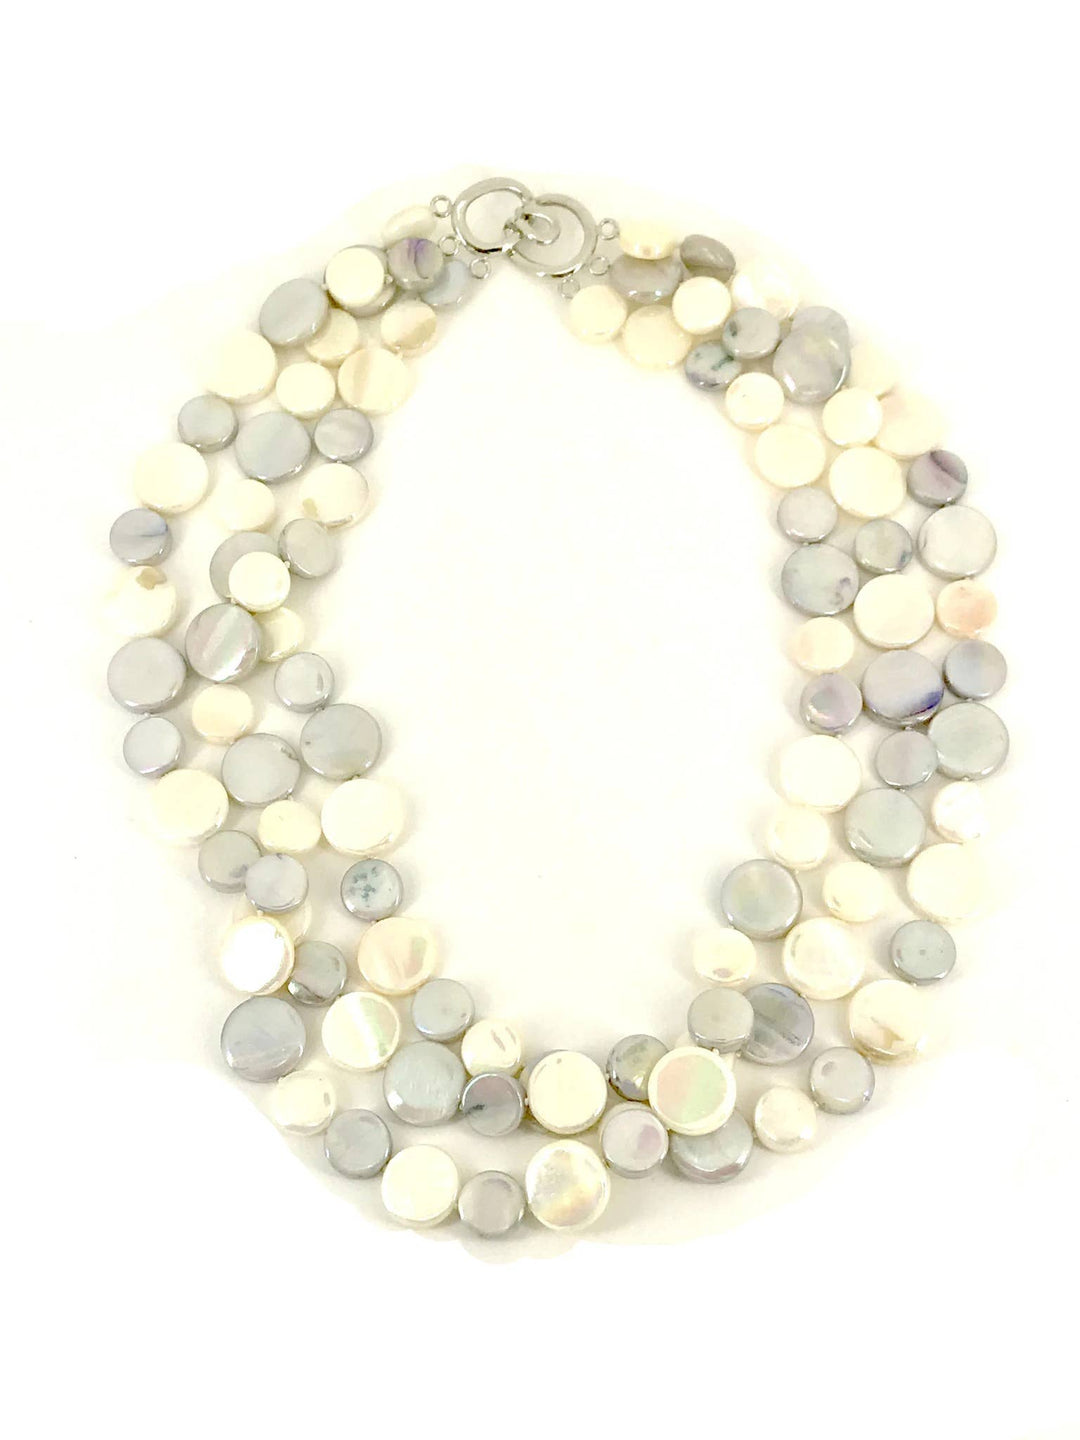 Sea Lily - 252015 - Gray and White 3 Strand MOP Necklace